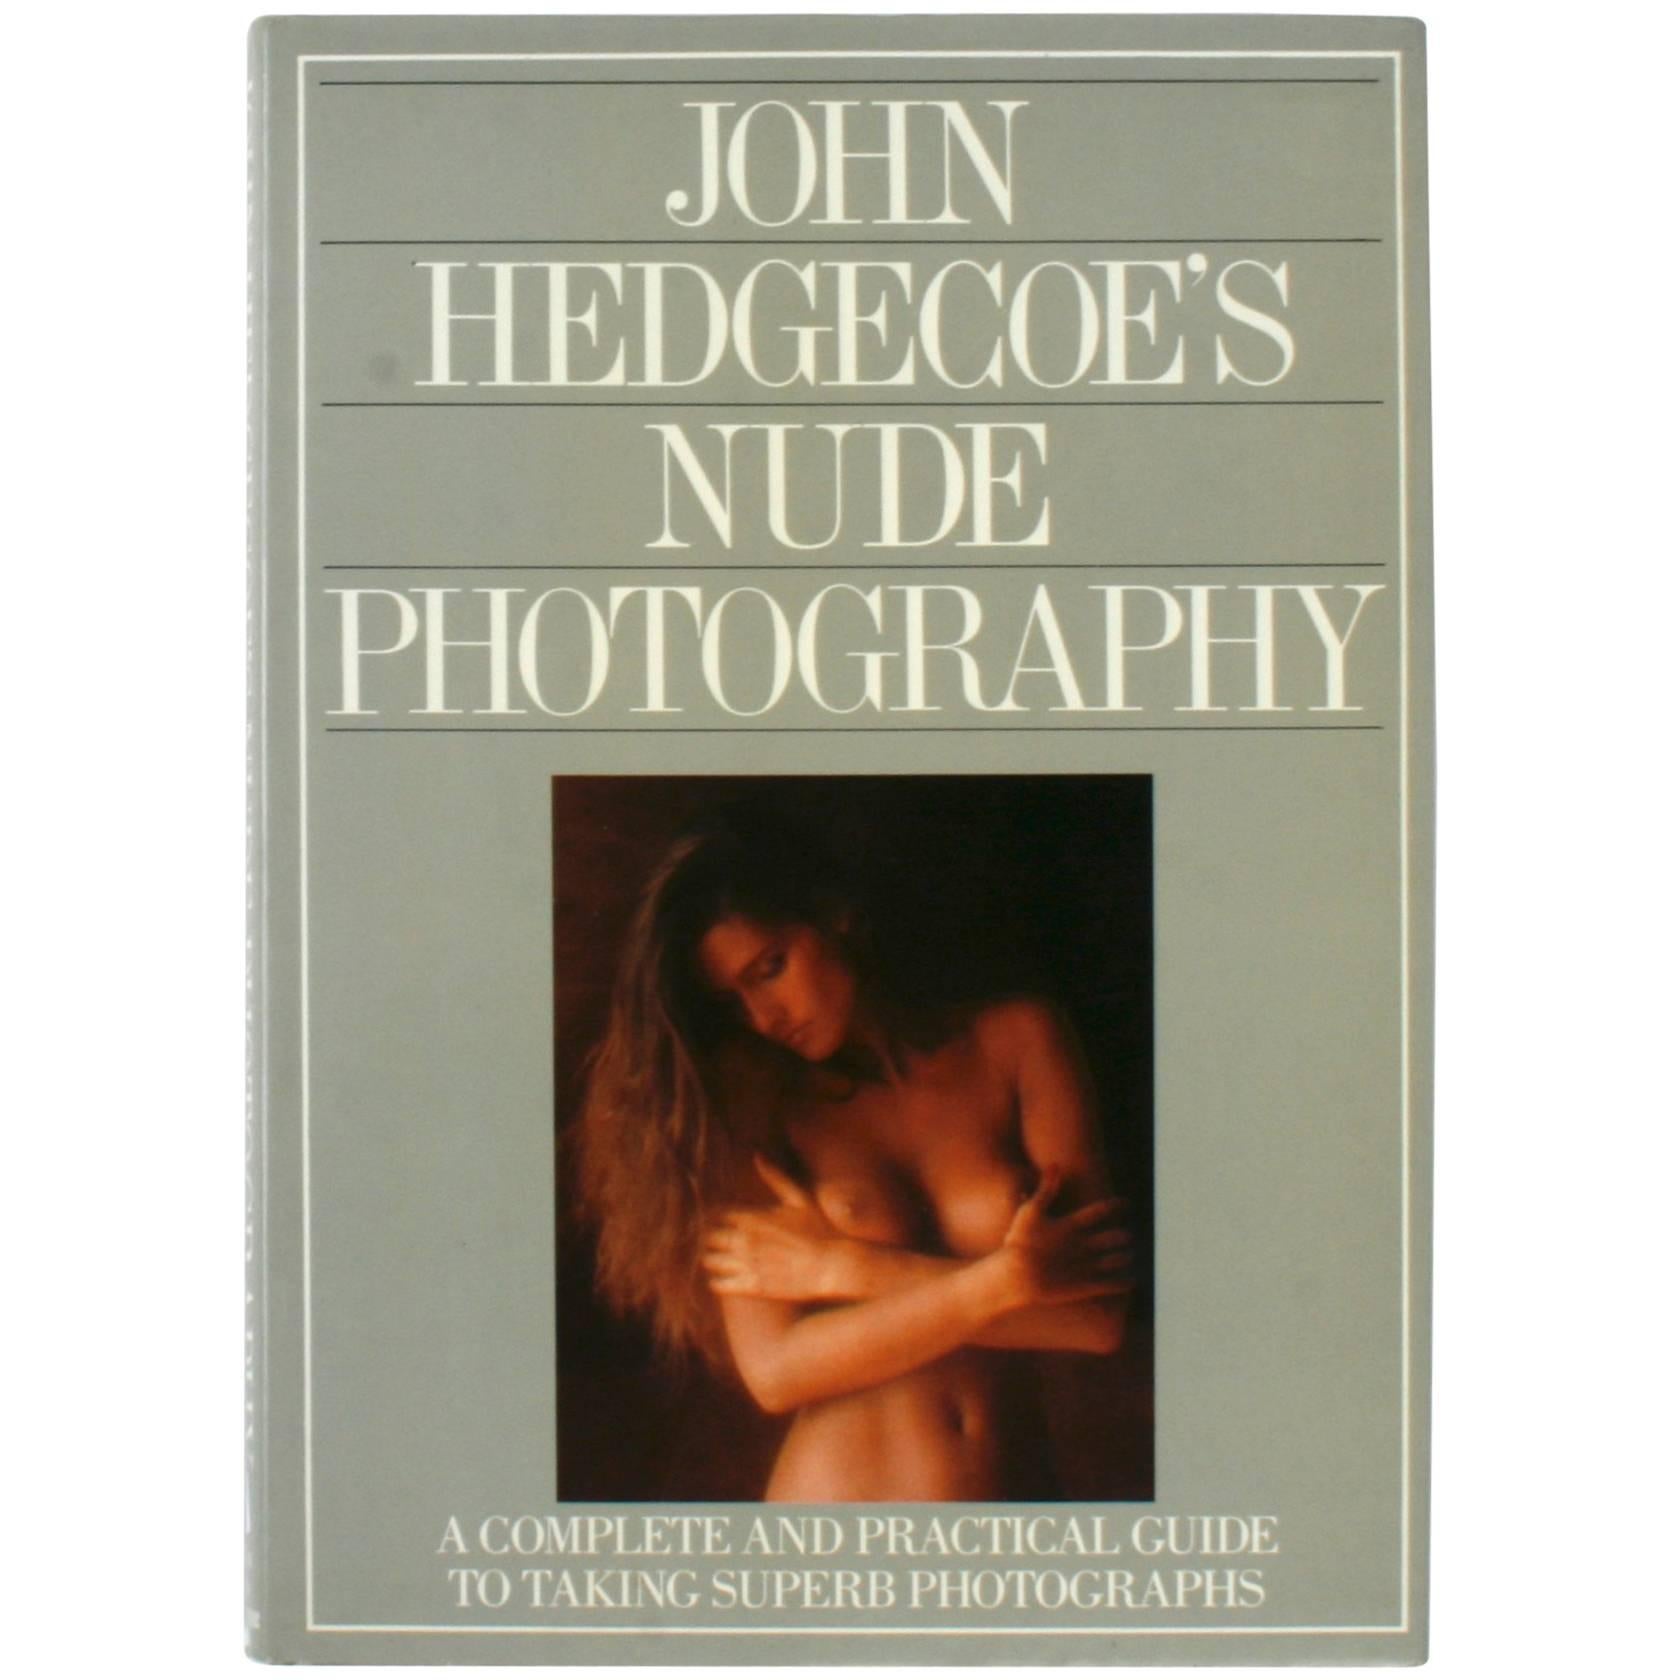 John Hedgecoe's Nude Photography, First Edition